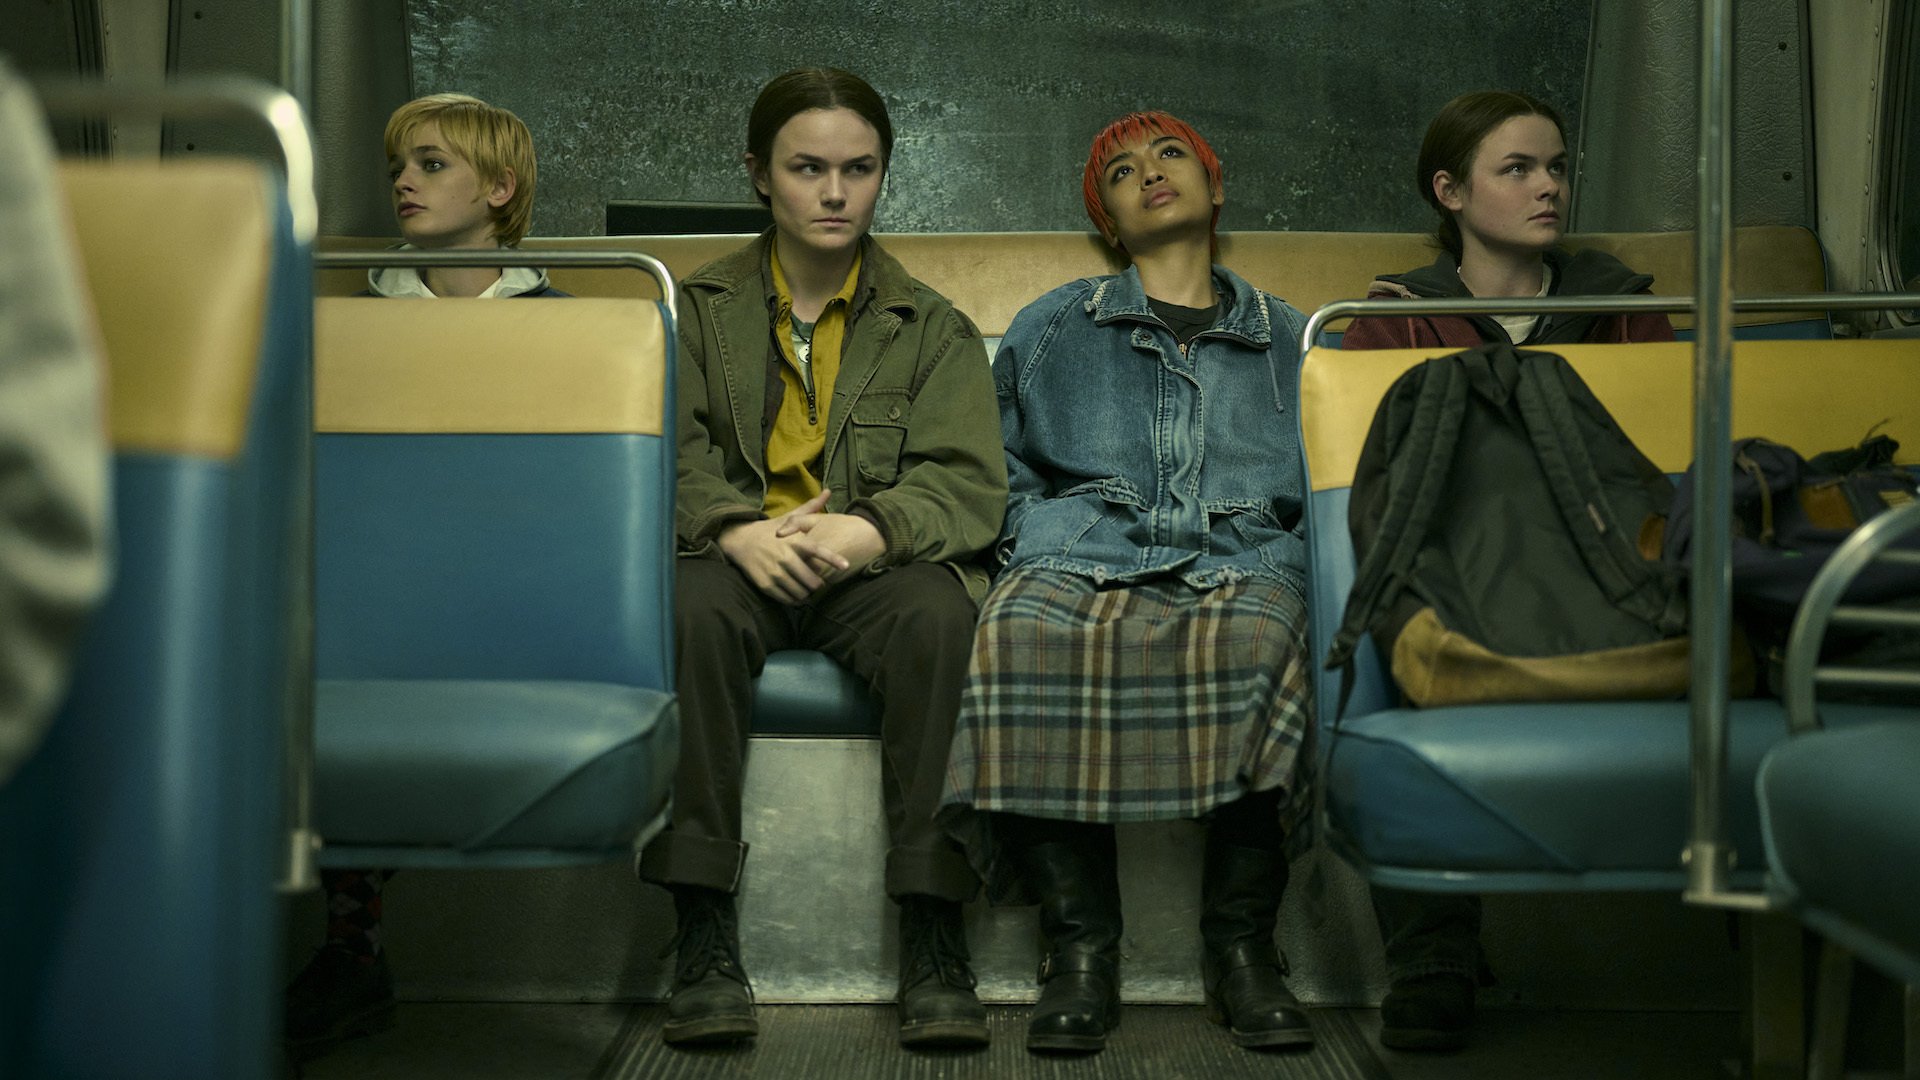 Four students sit at the back of a bus.